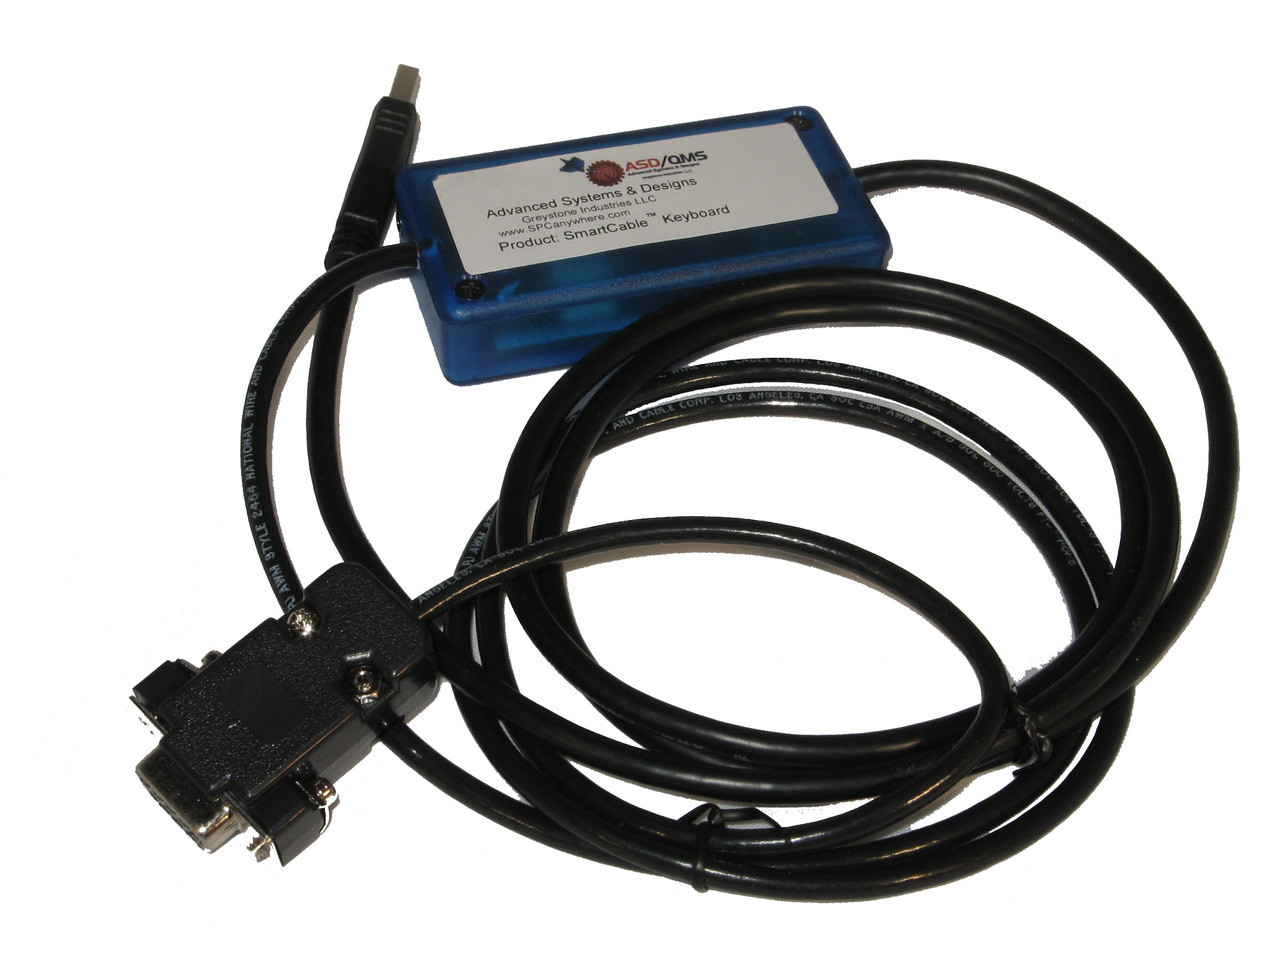 Adam Equipment Gk Gbk Gfk Series Rs232 To Excel Interface Cable